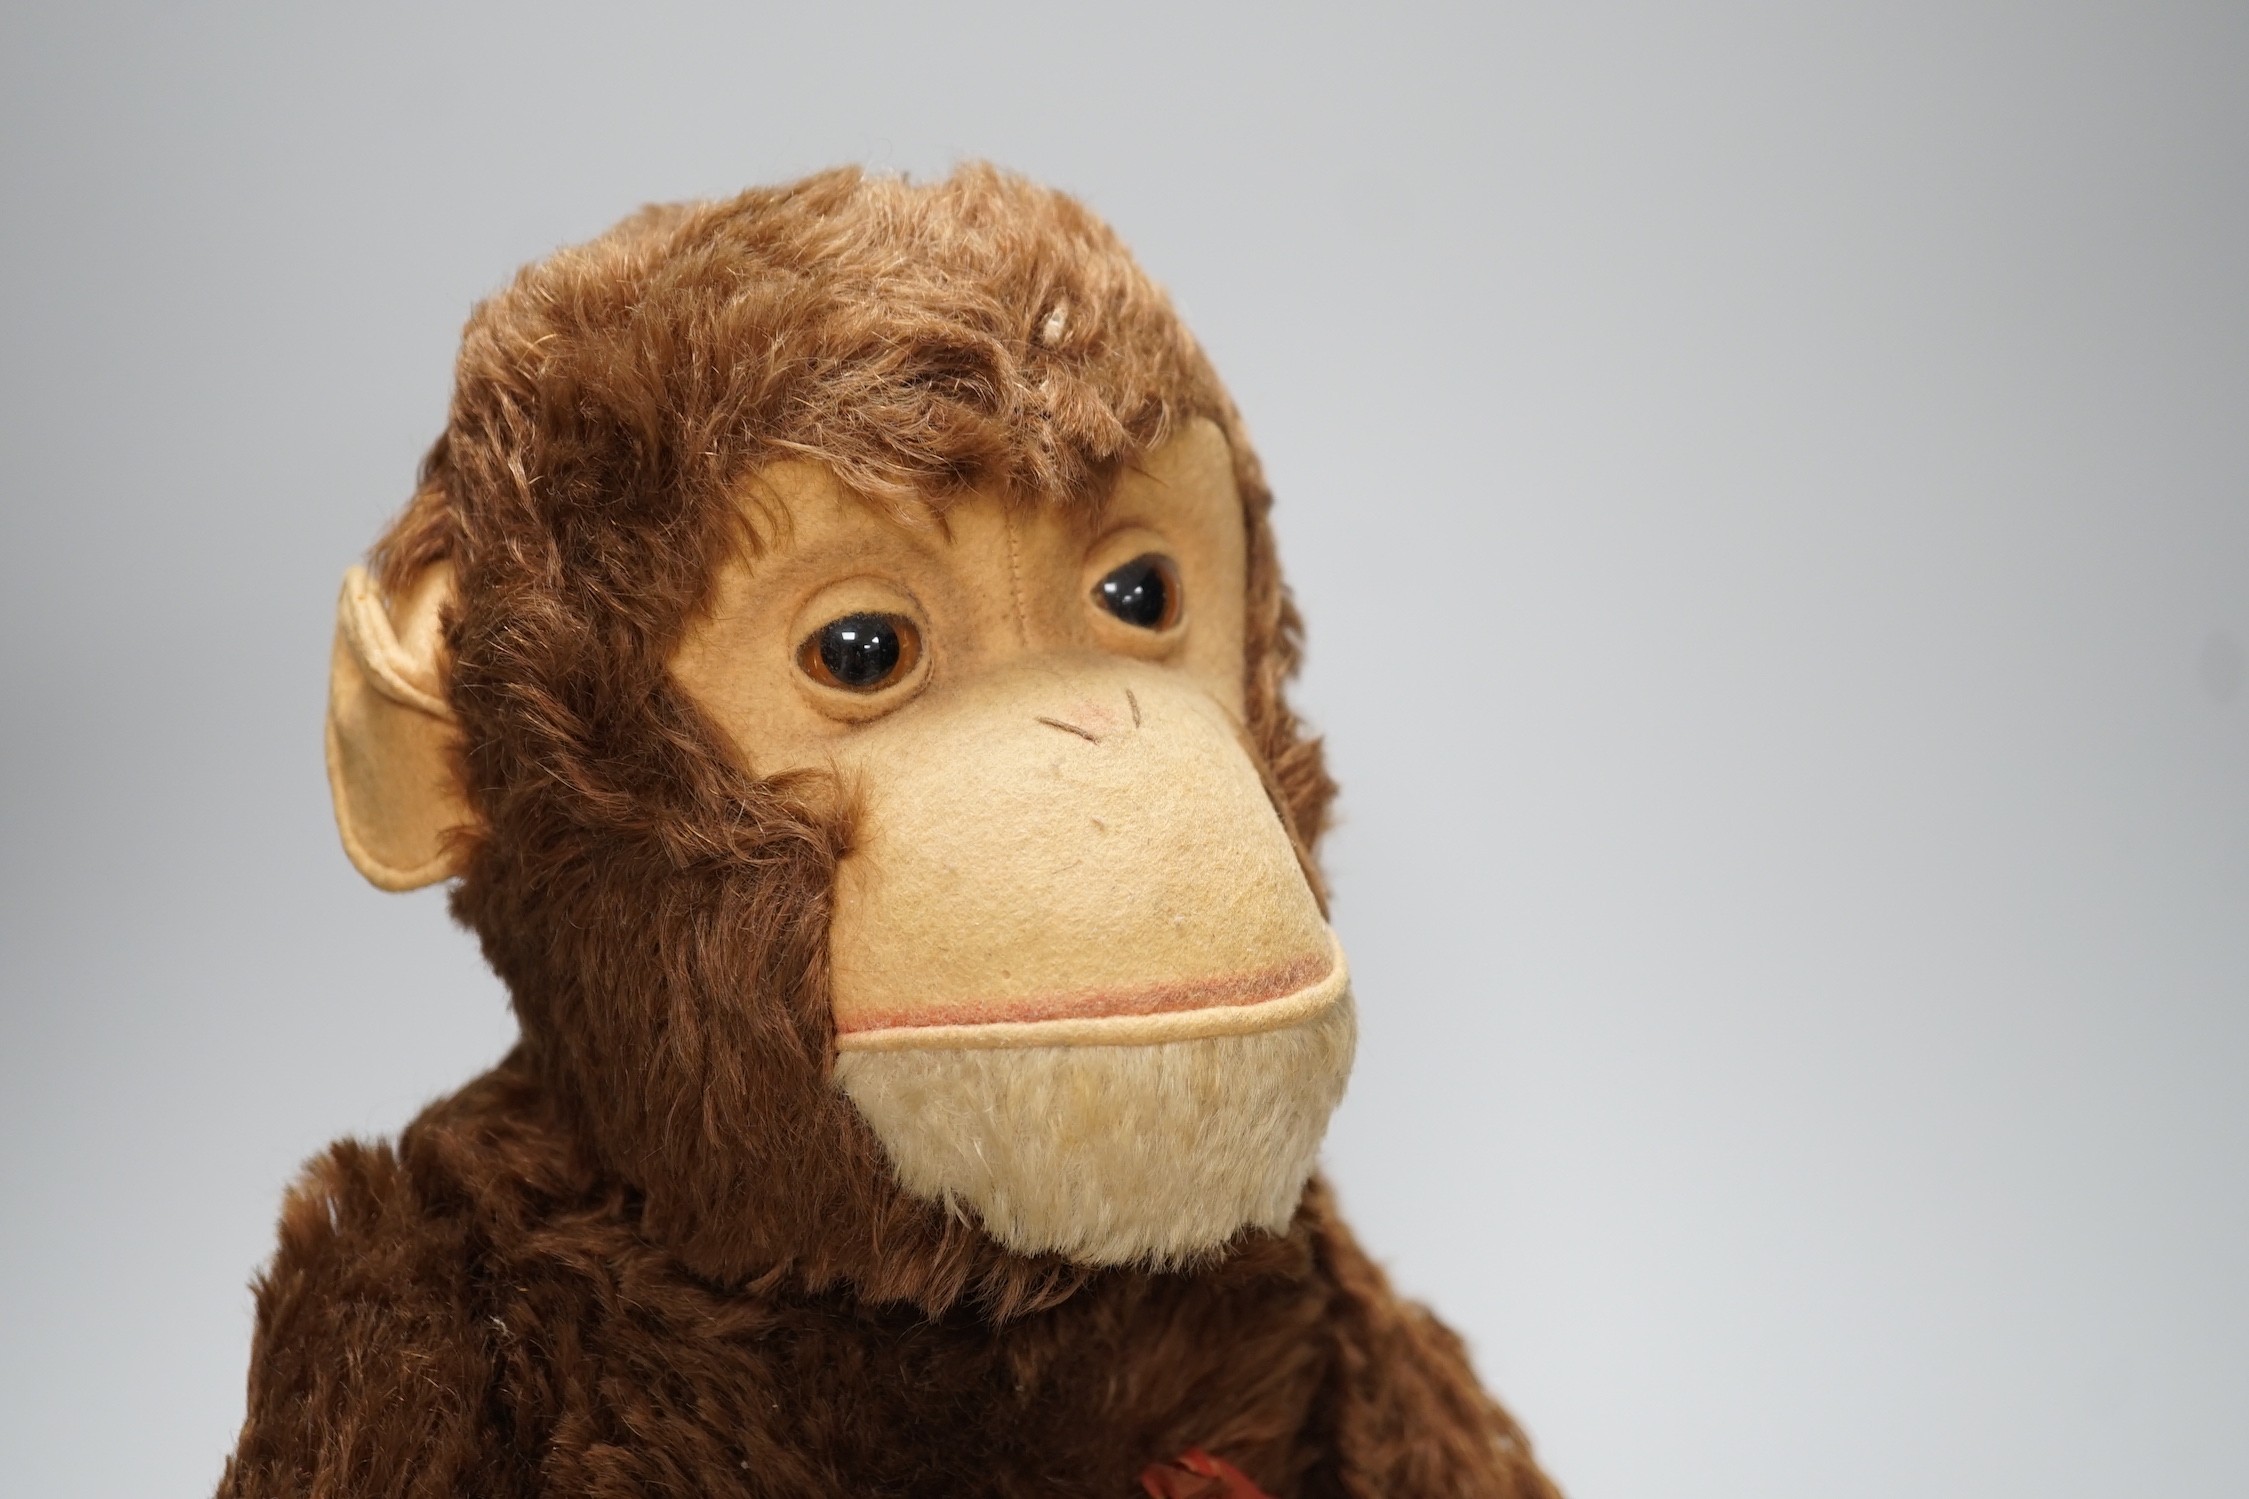 A Schuco 'Yes No' Tricky mohair monkey, 51cm - Image 2 of 8